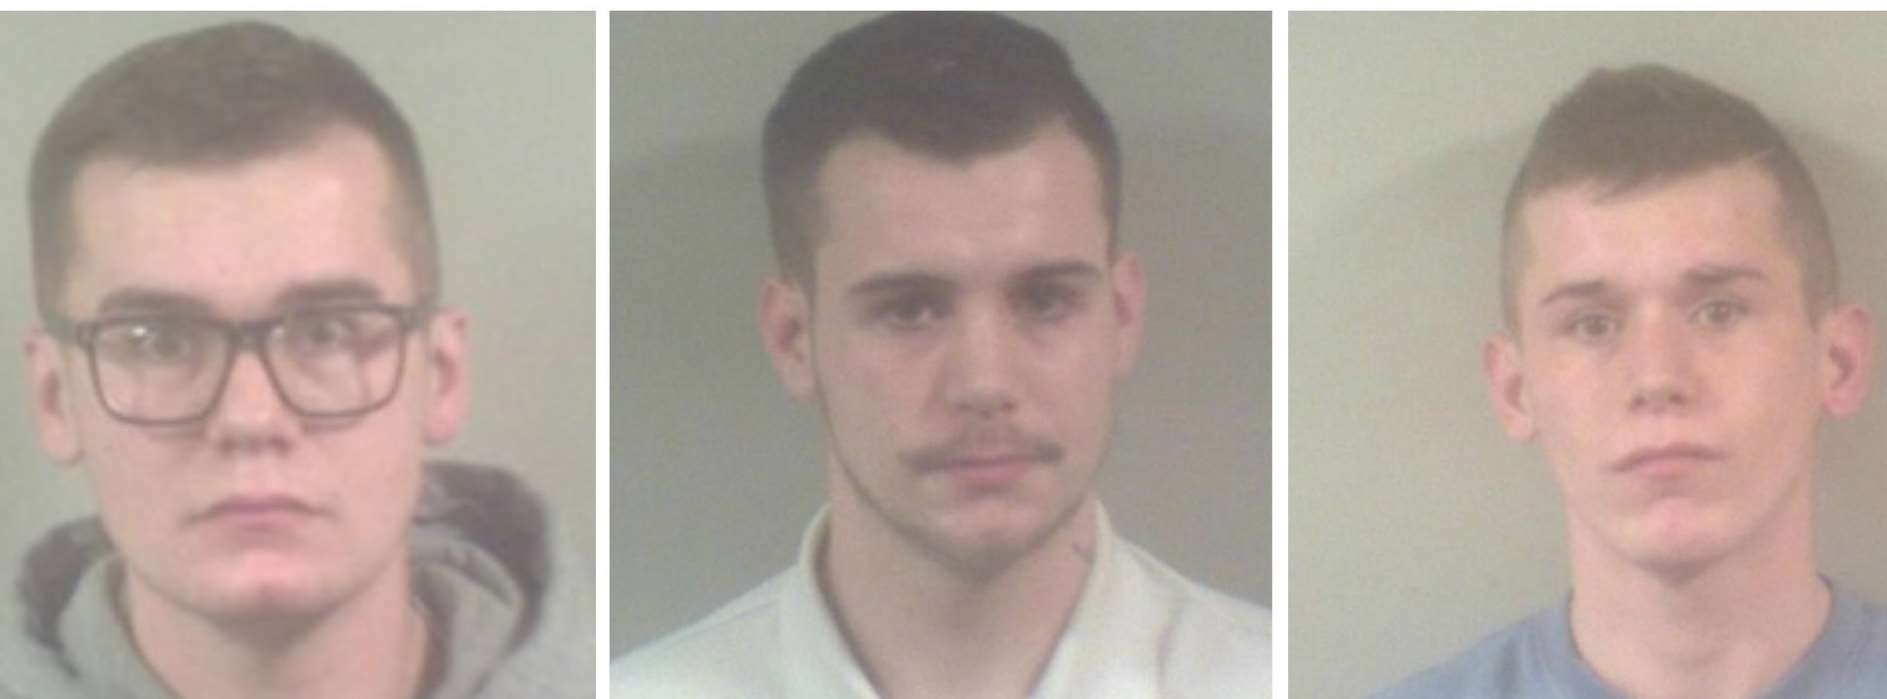 Scott, Adam and Joshua Knight have all been sentence to life in prison. Picture: Kent Police